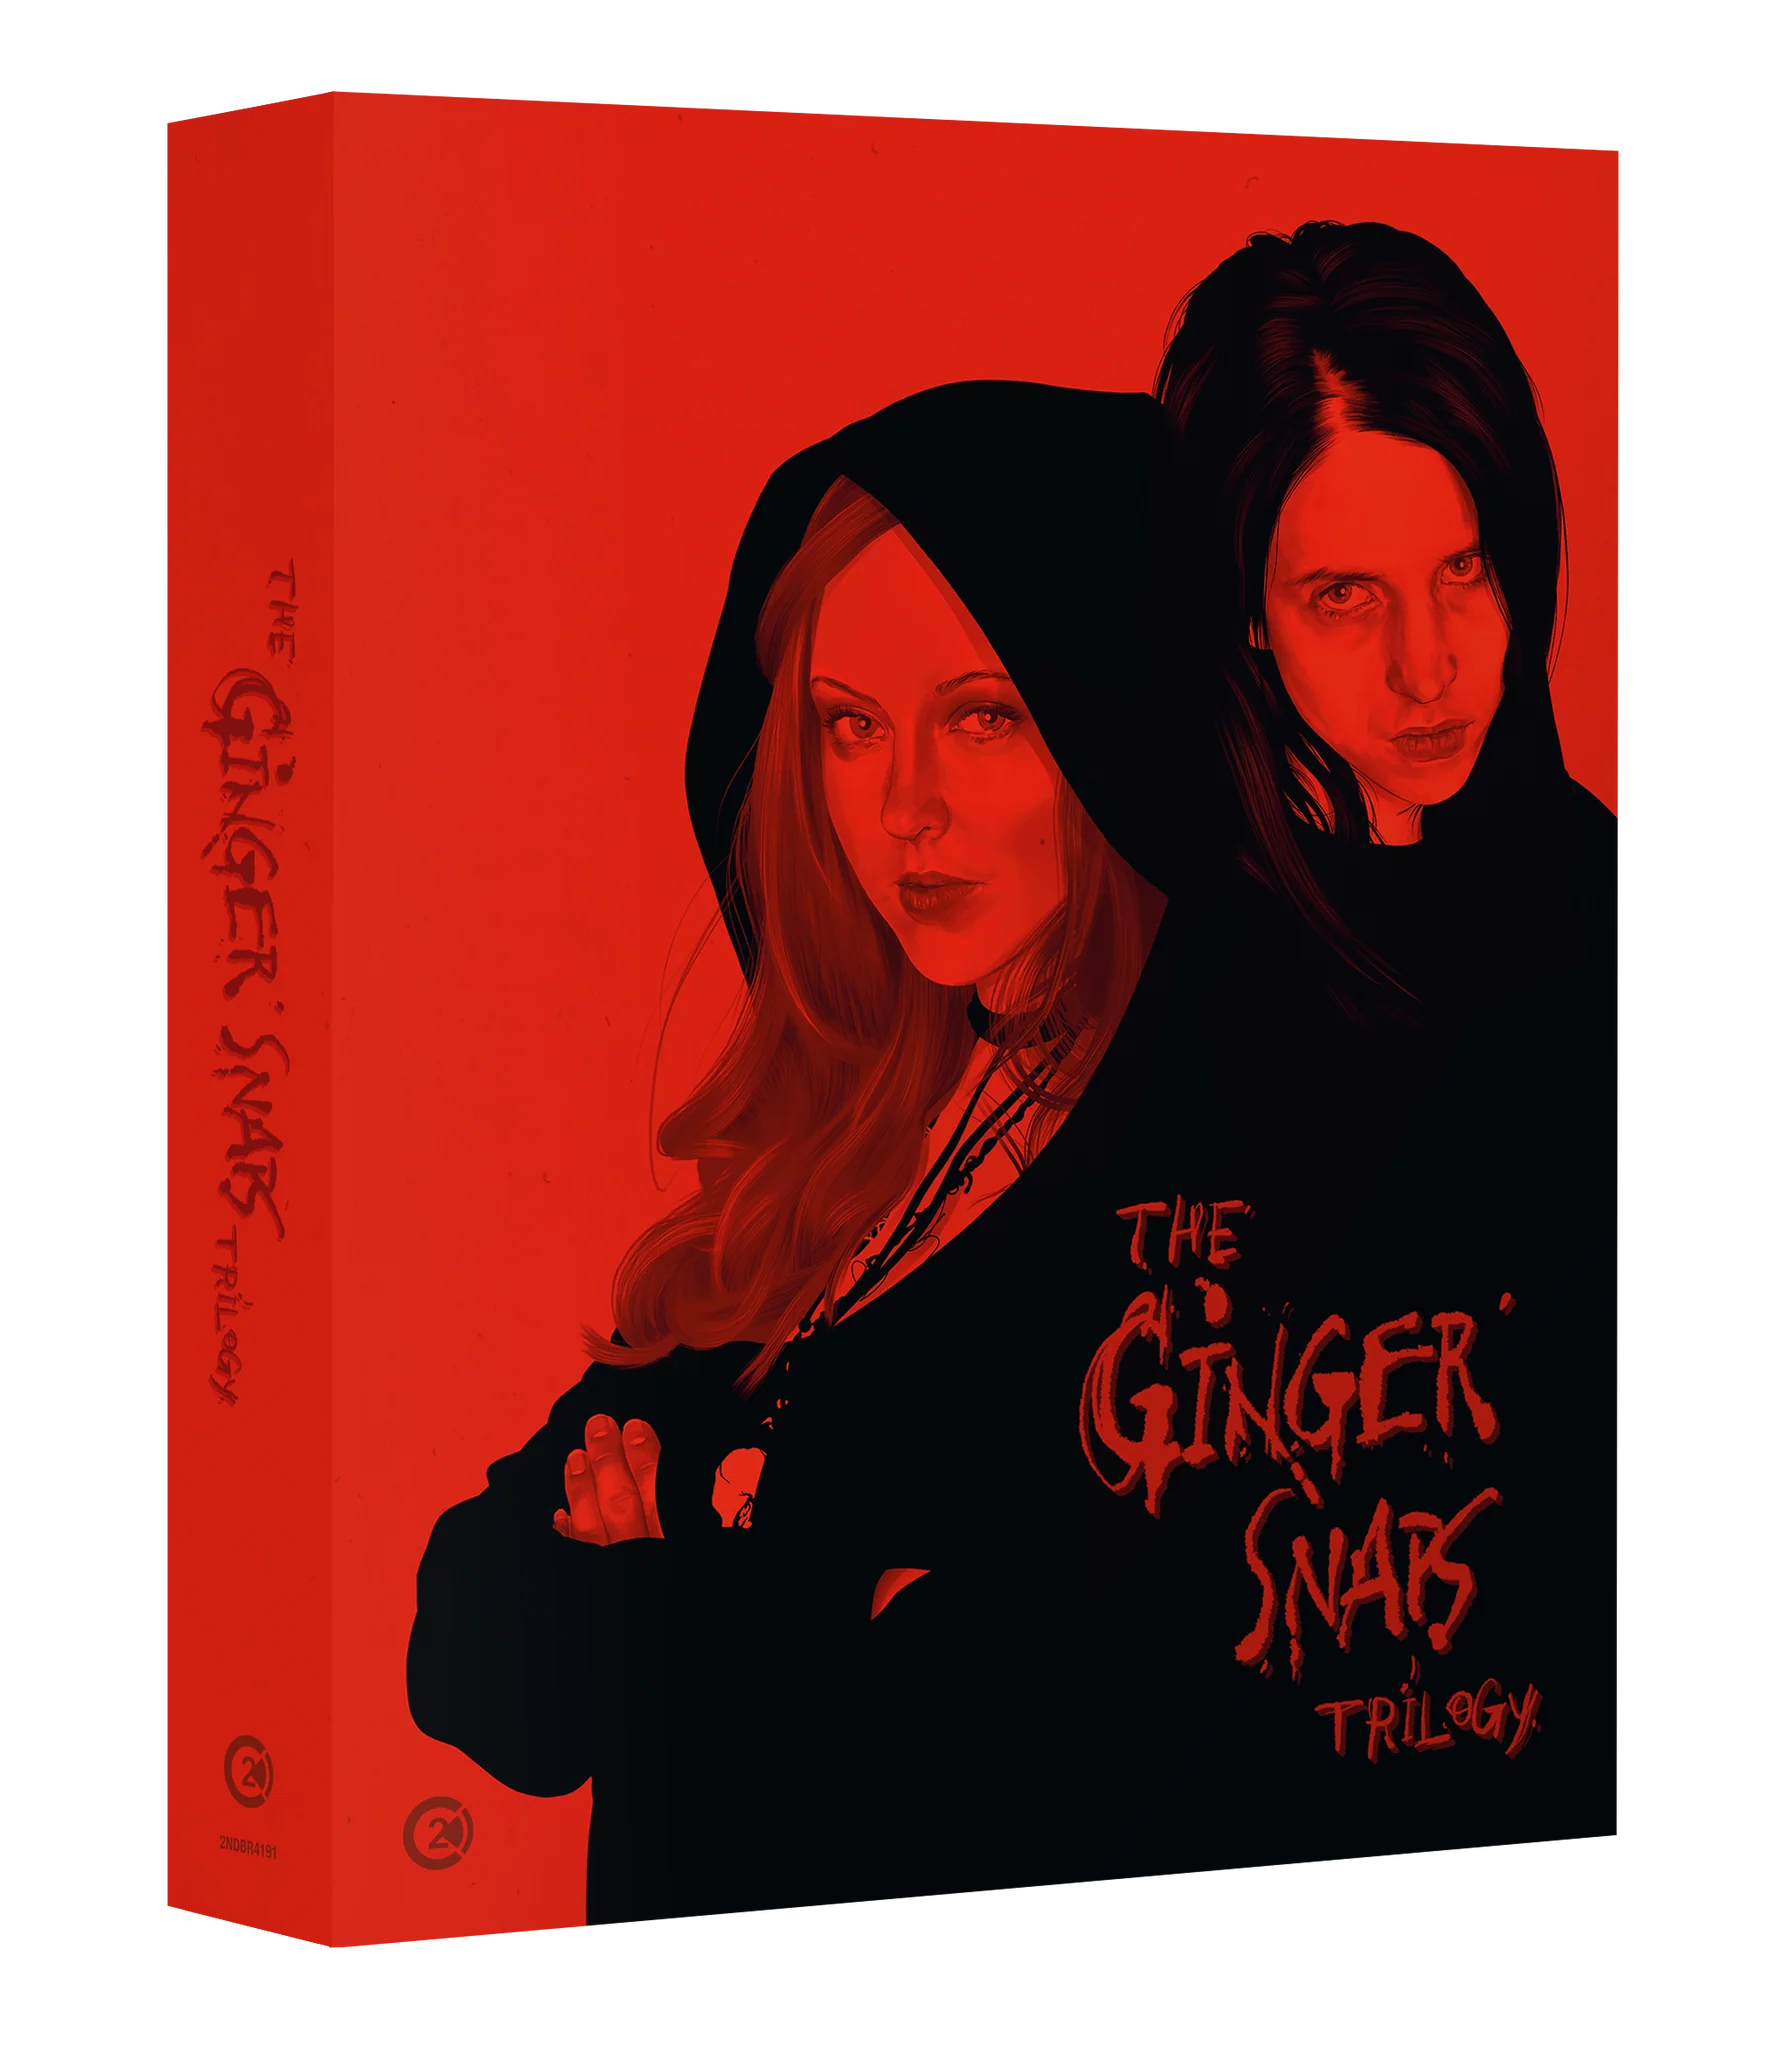 THE GINGER SNAPS TRILOGY (REGION B IMPORT - LIMITED EDITION) BLU-RAY